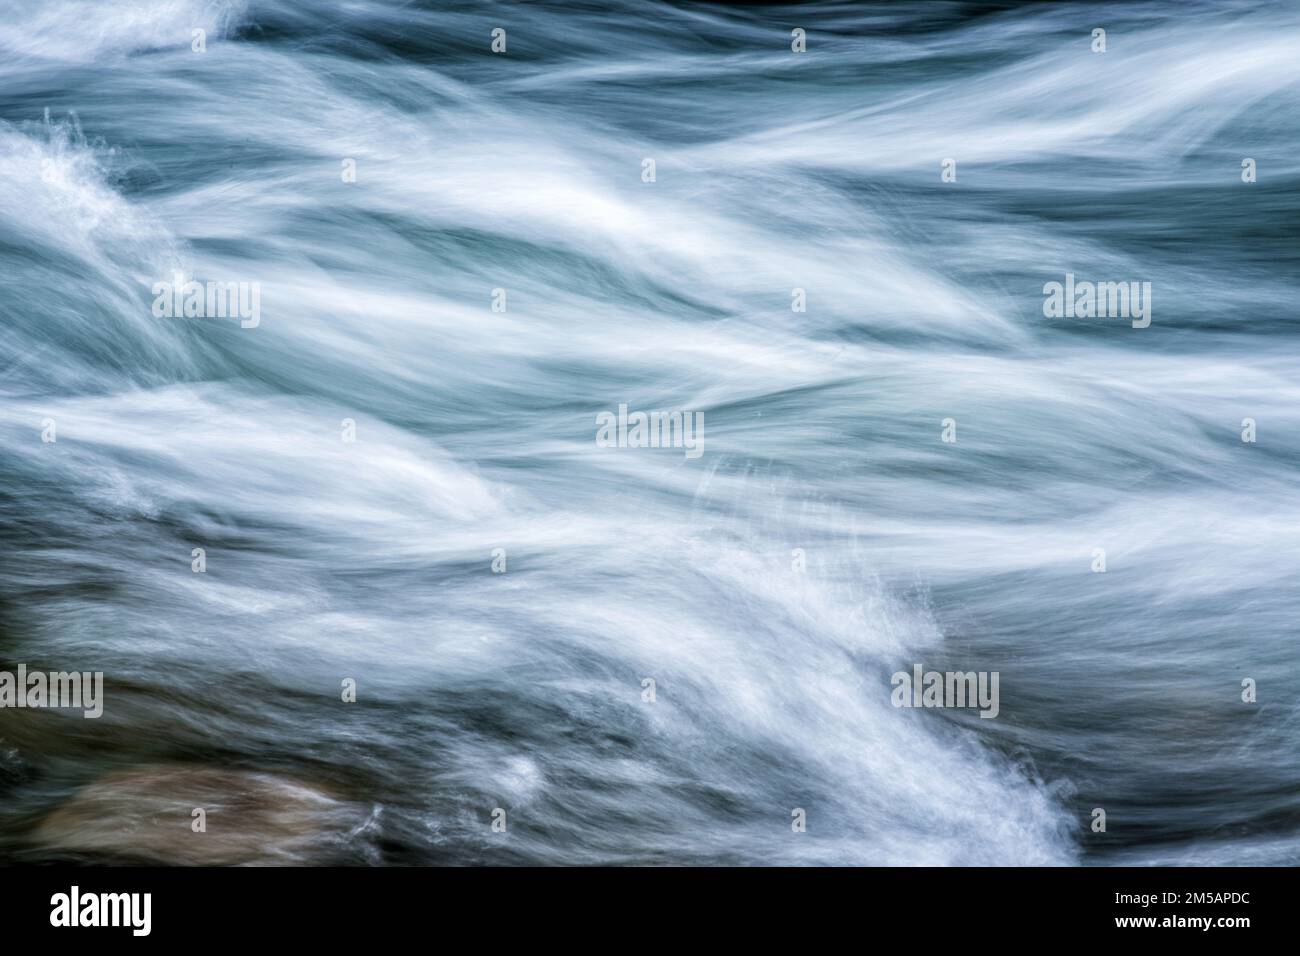 A time exposure of a flowing mountain stream with a large rock at the bottom left. Stock Photo